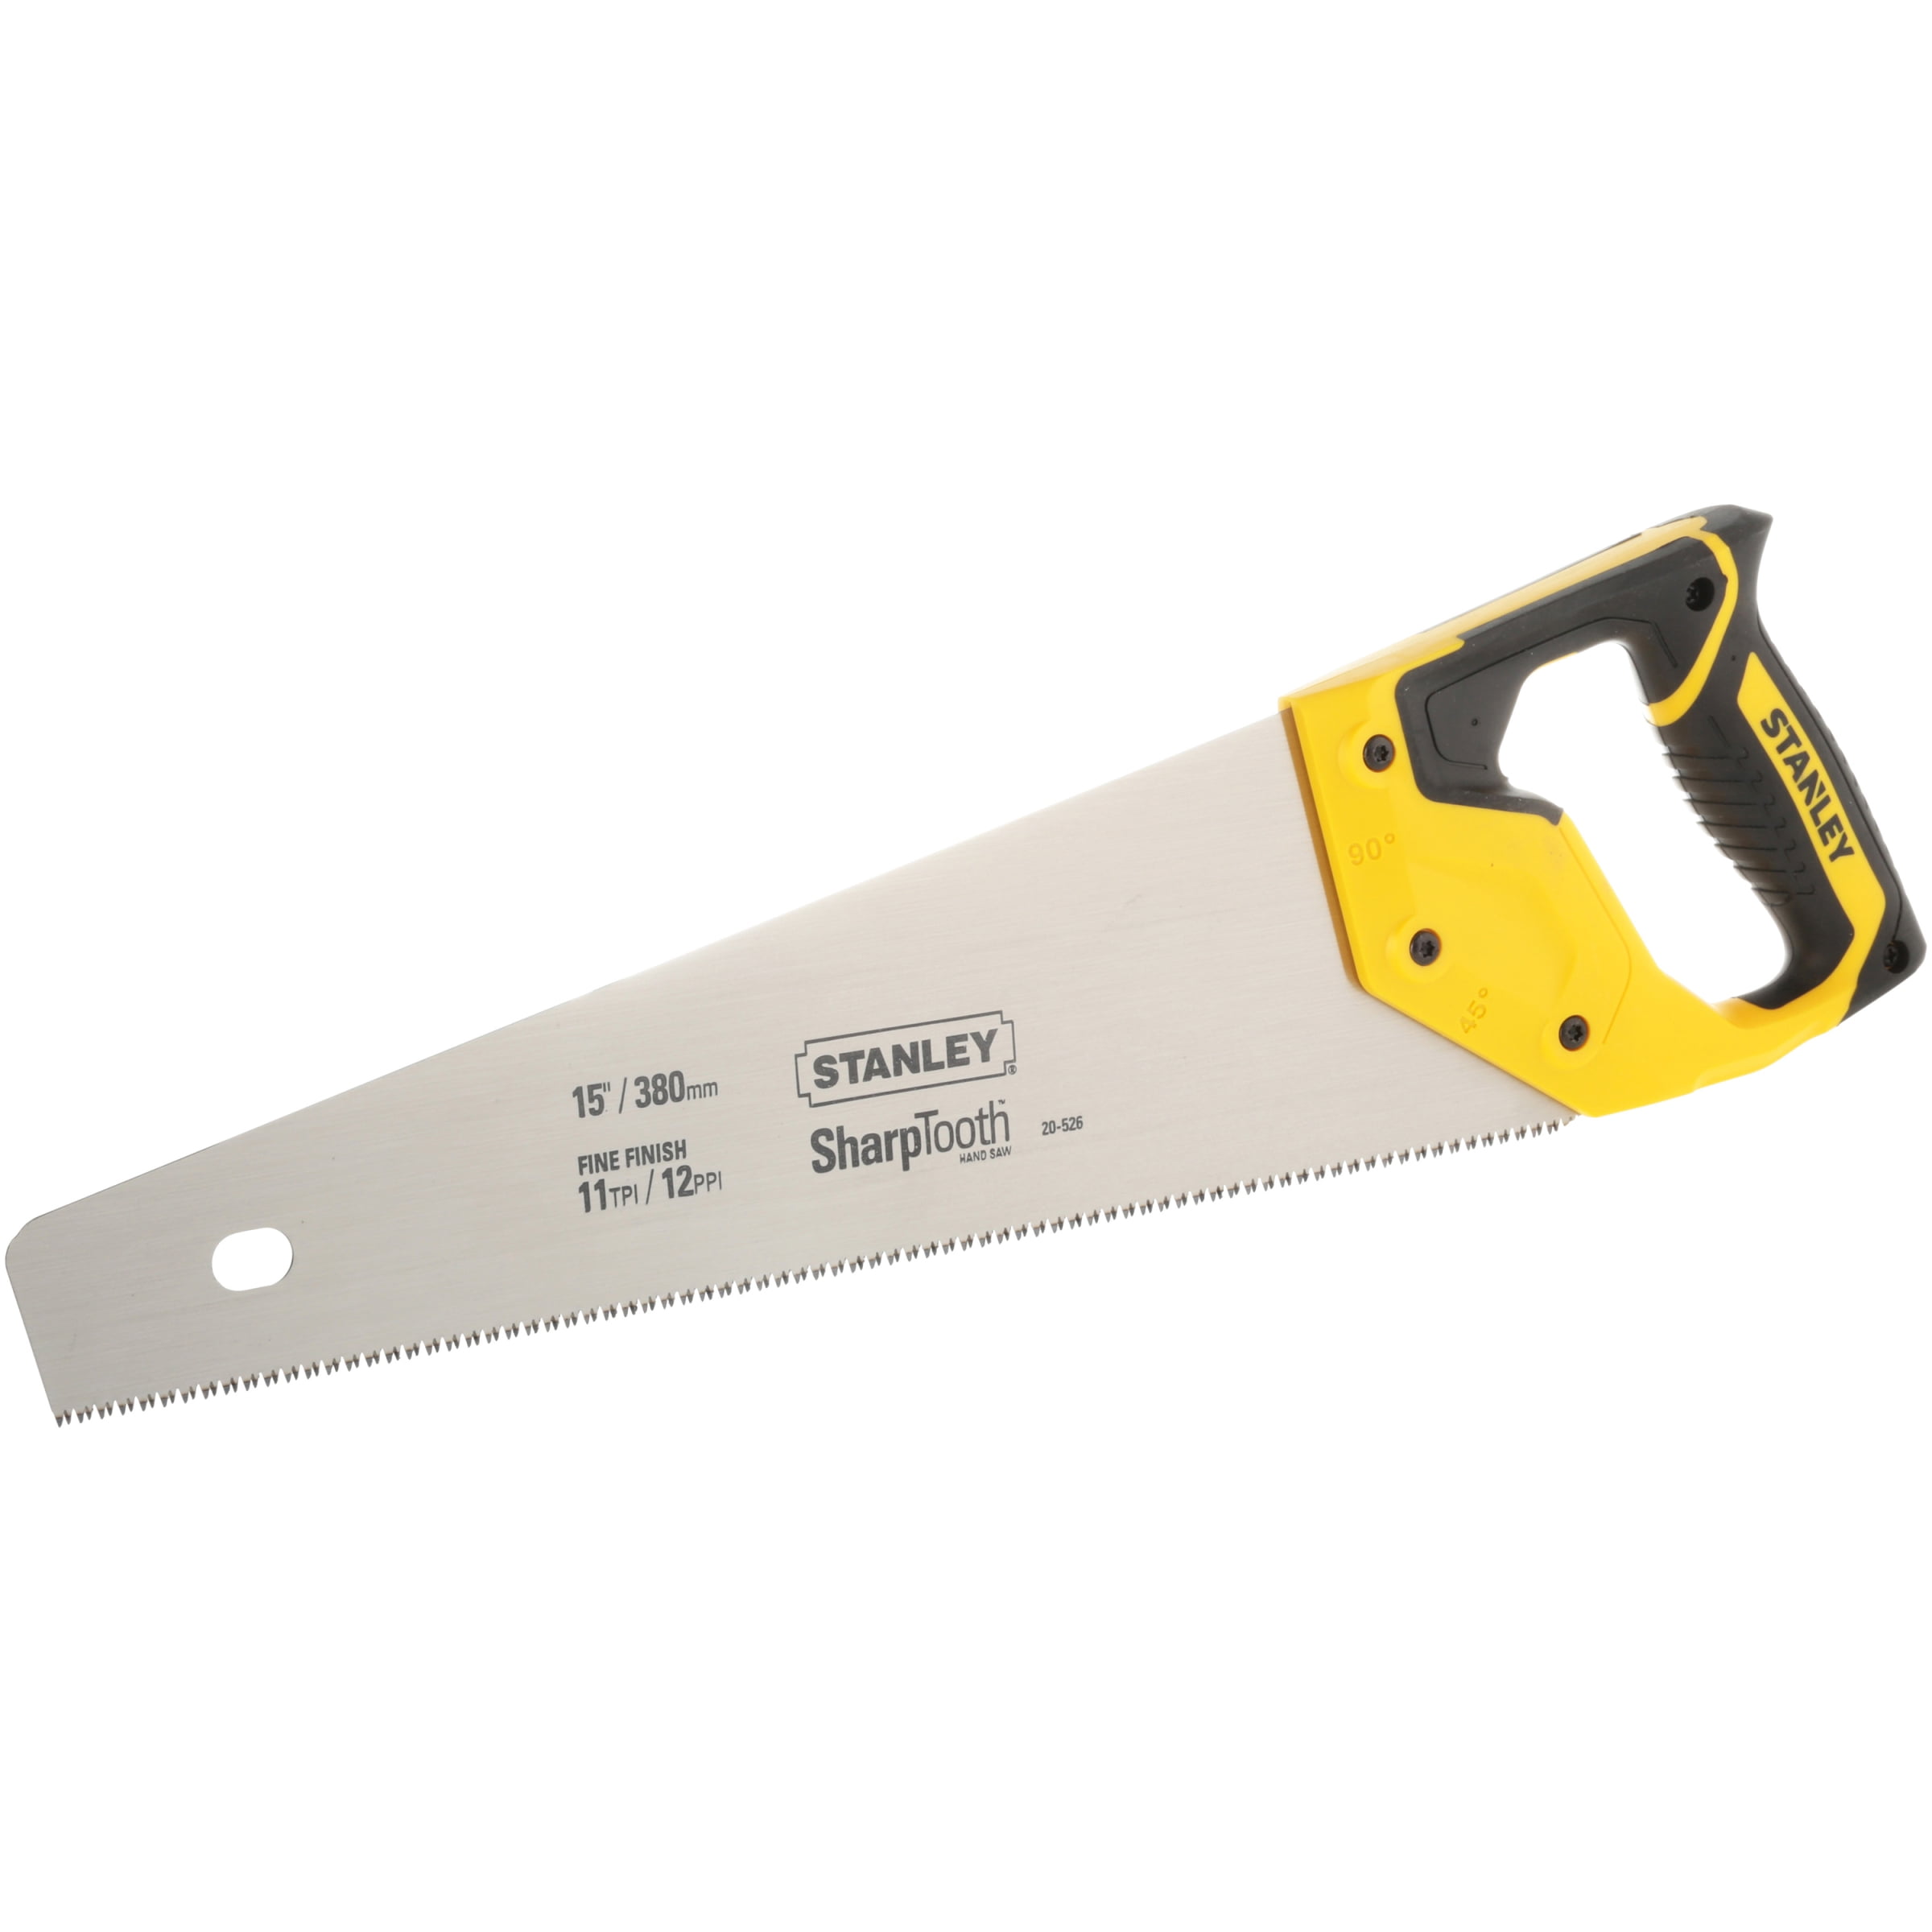 20-526 Sharptooth Hand Saw STANLEY 15-Inch